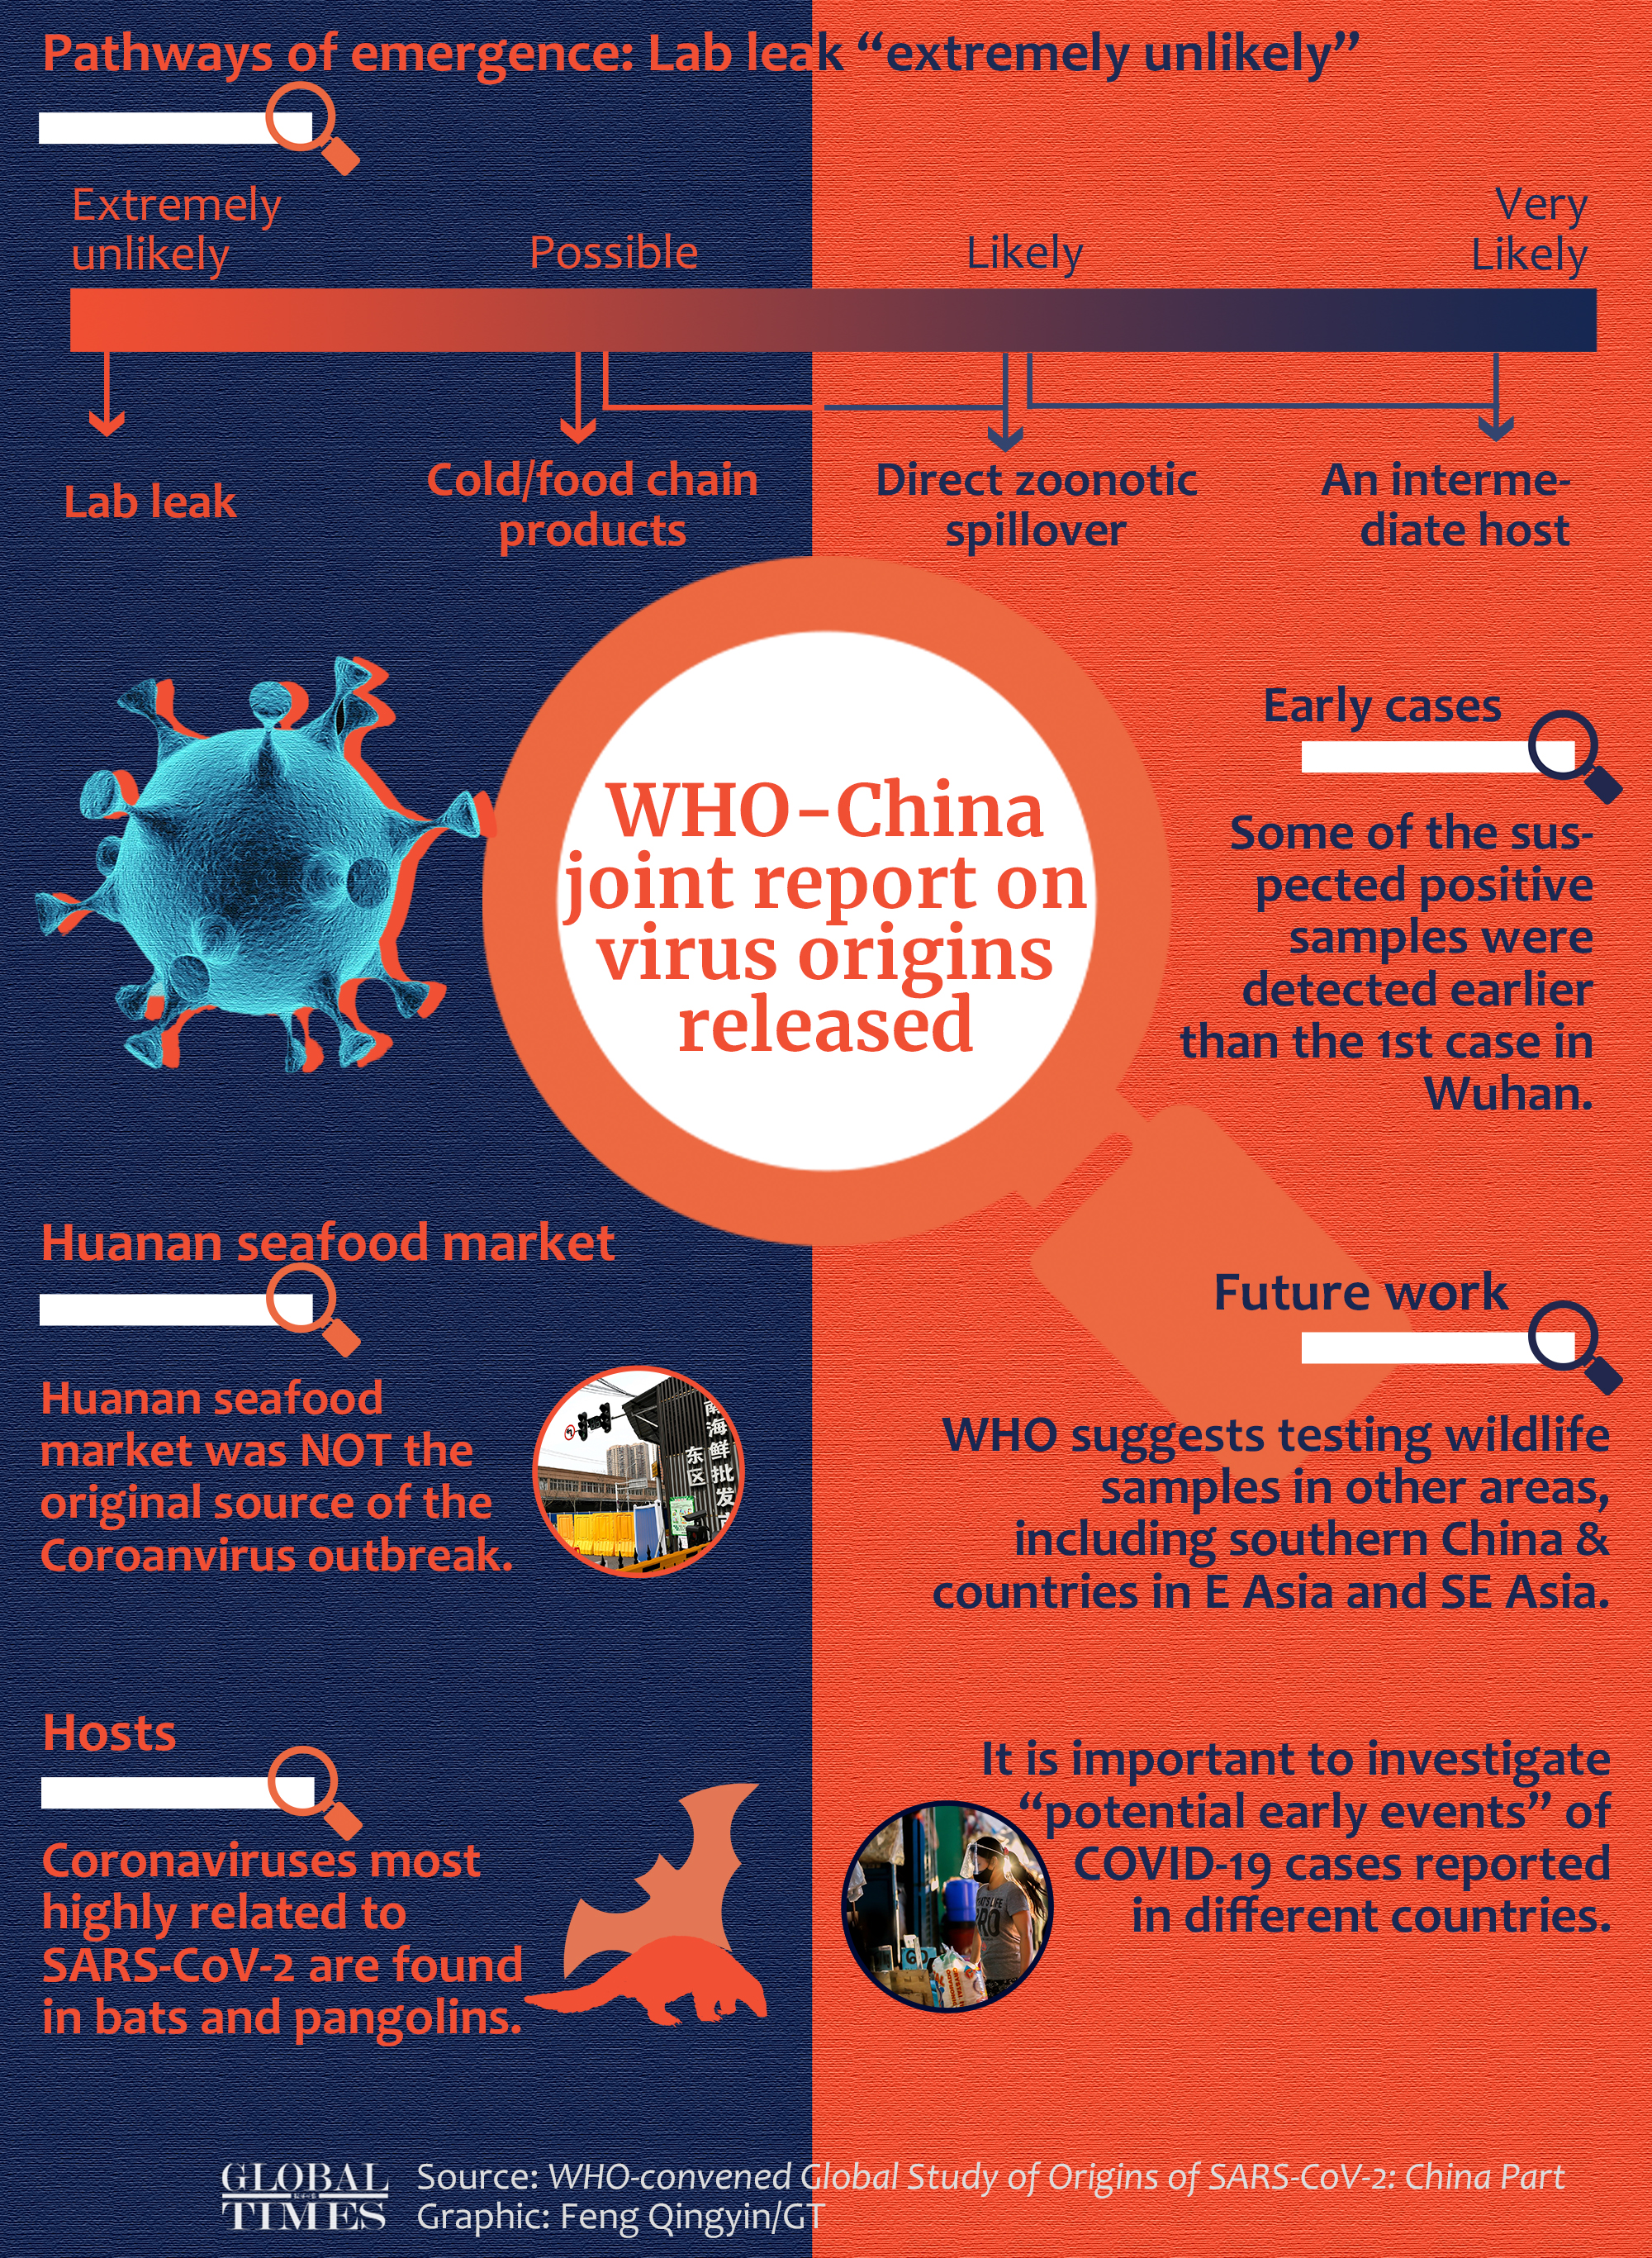 Highlights from #WHO-China joint report on coronavirus origins:
-A lab leak was extremely unlikely
-Huanan seafood market was NOT the original source of the outbreak
-It’s important to investigate “potential early events” of COVID-19 cases in different countries
Graphic: Feng Qingyin/GT